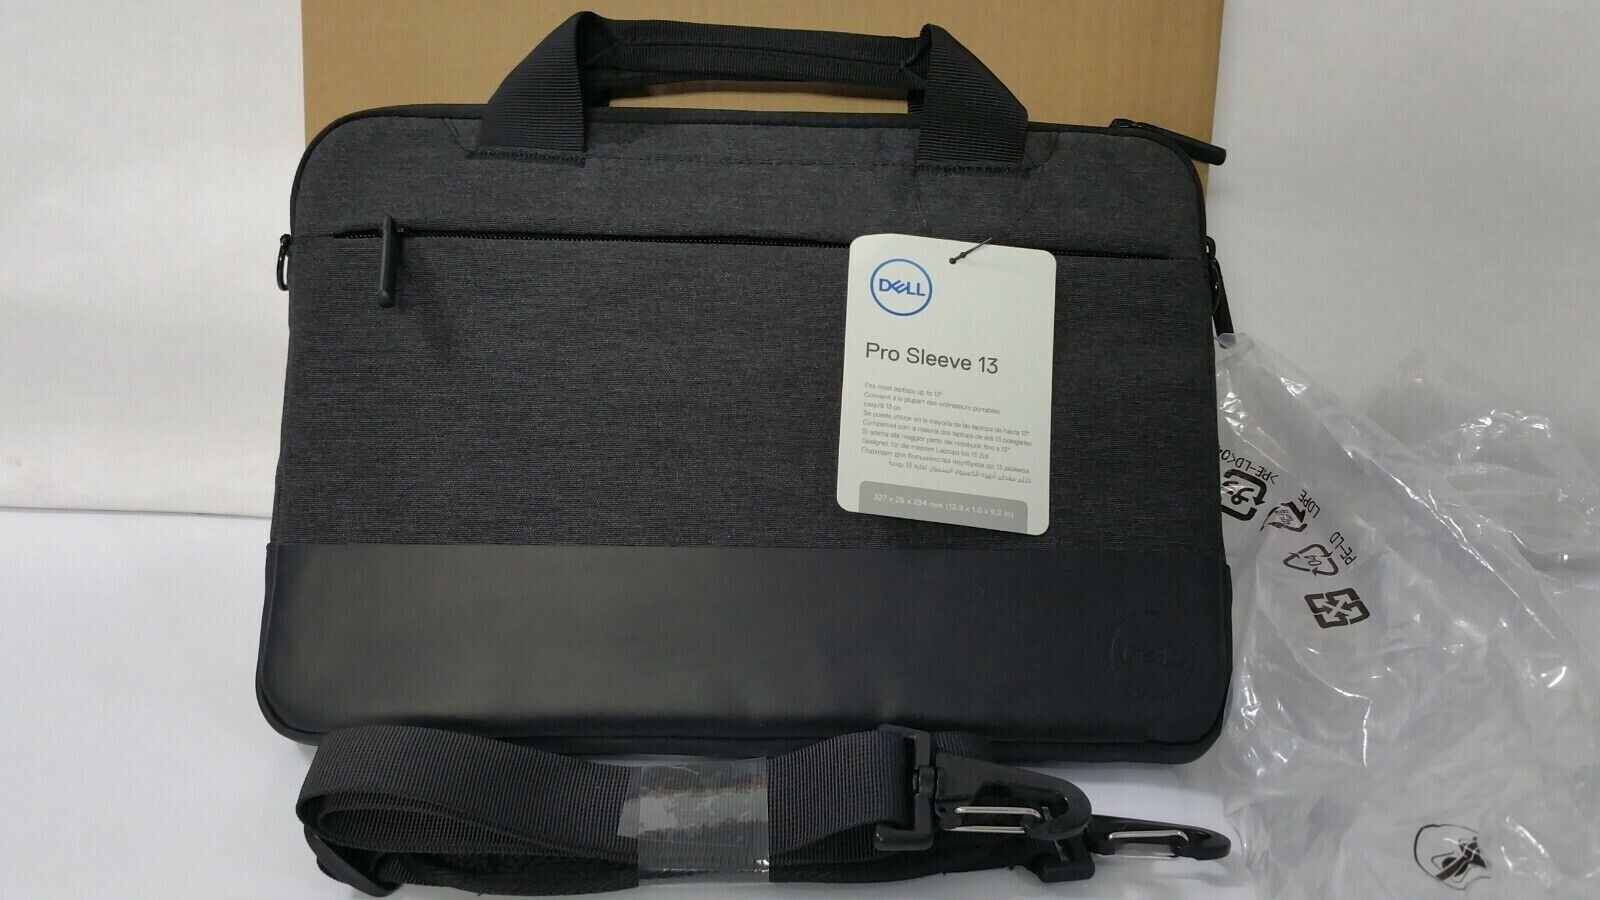 NEW GENUINE Dell Laptop Bag Professional Sleeve 13 Heather Gray 7MTR0